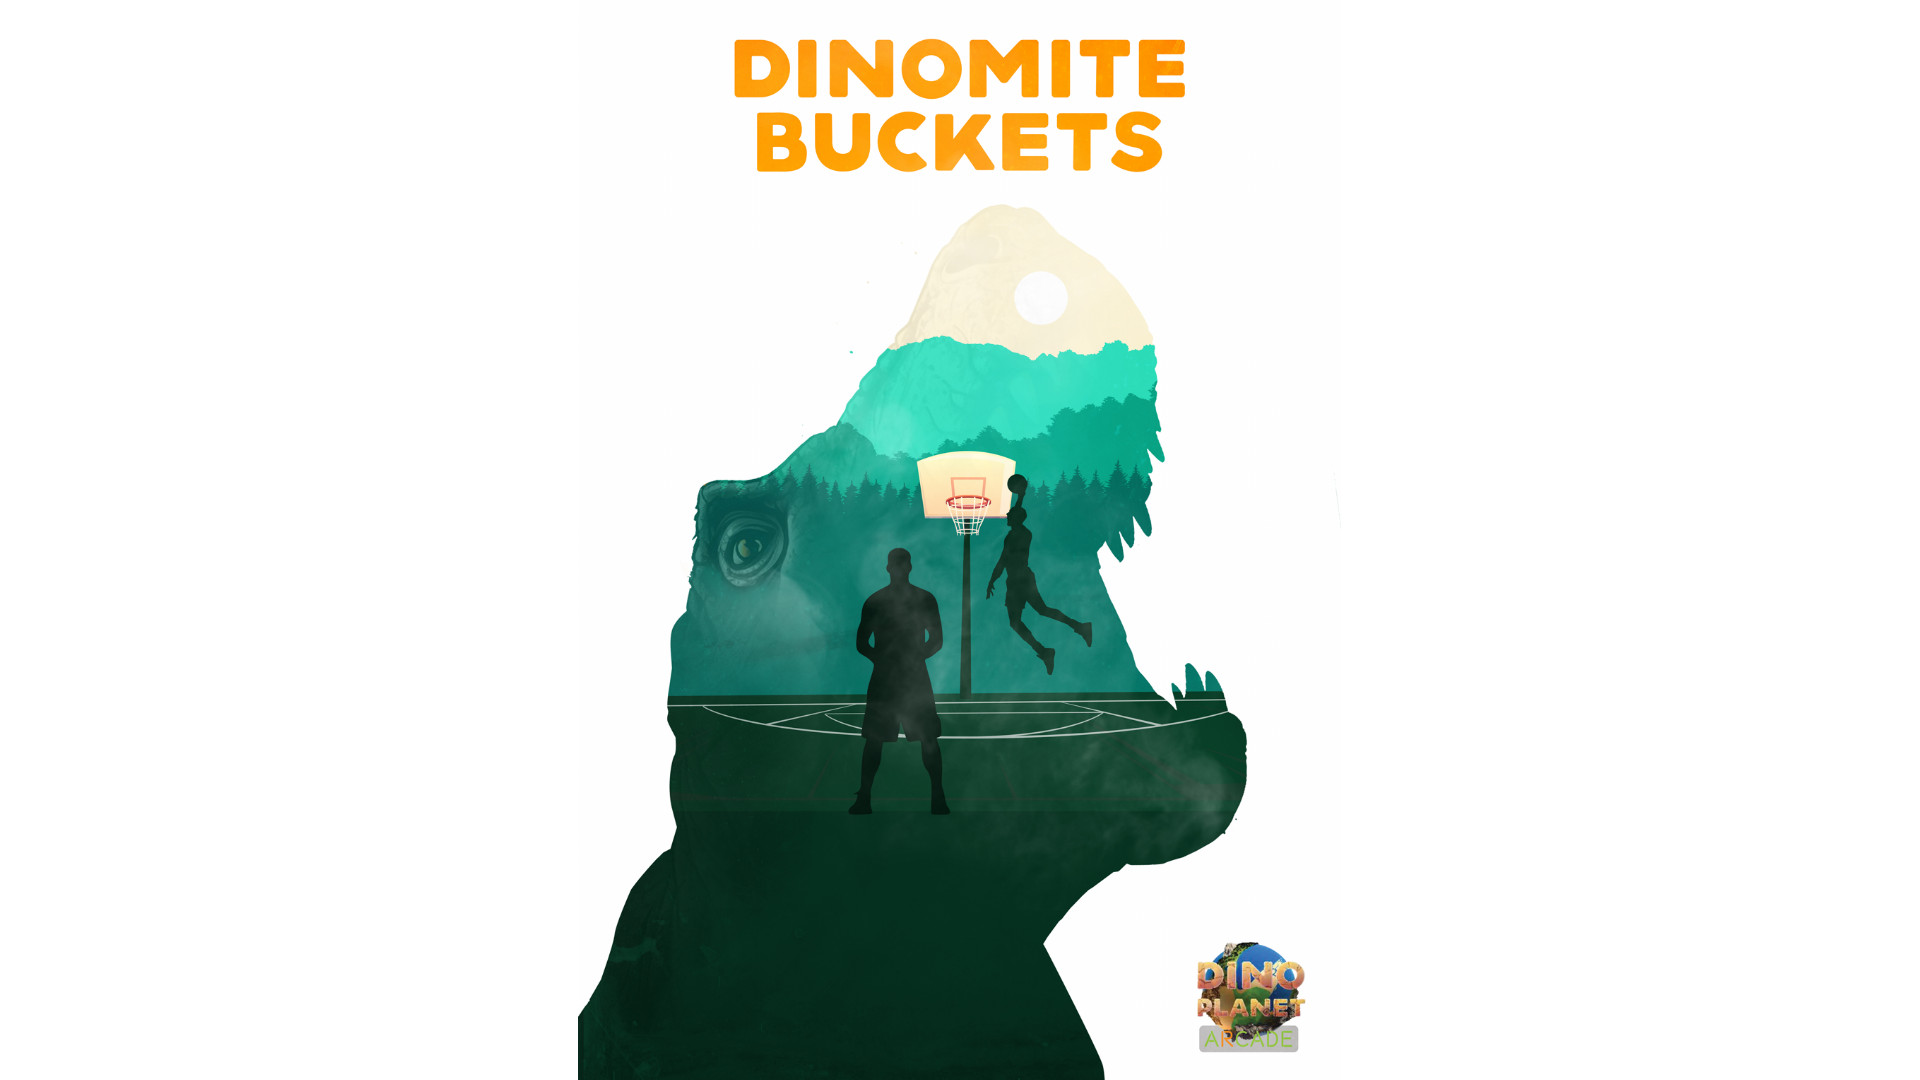 DinoMite Buckets Poster standard res1.png